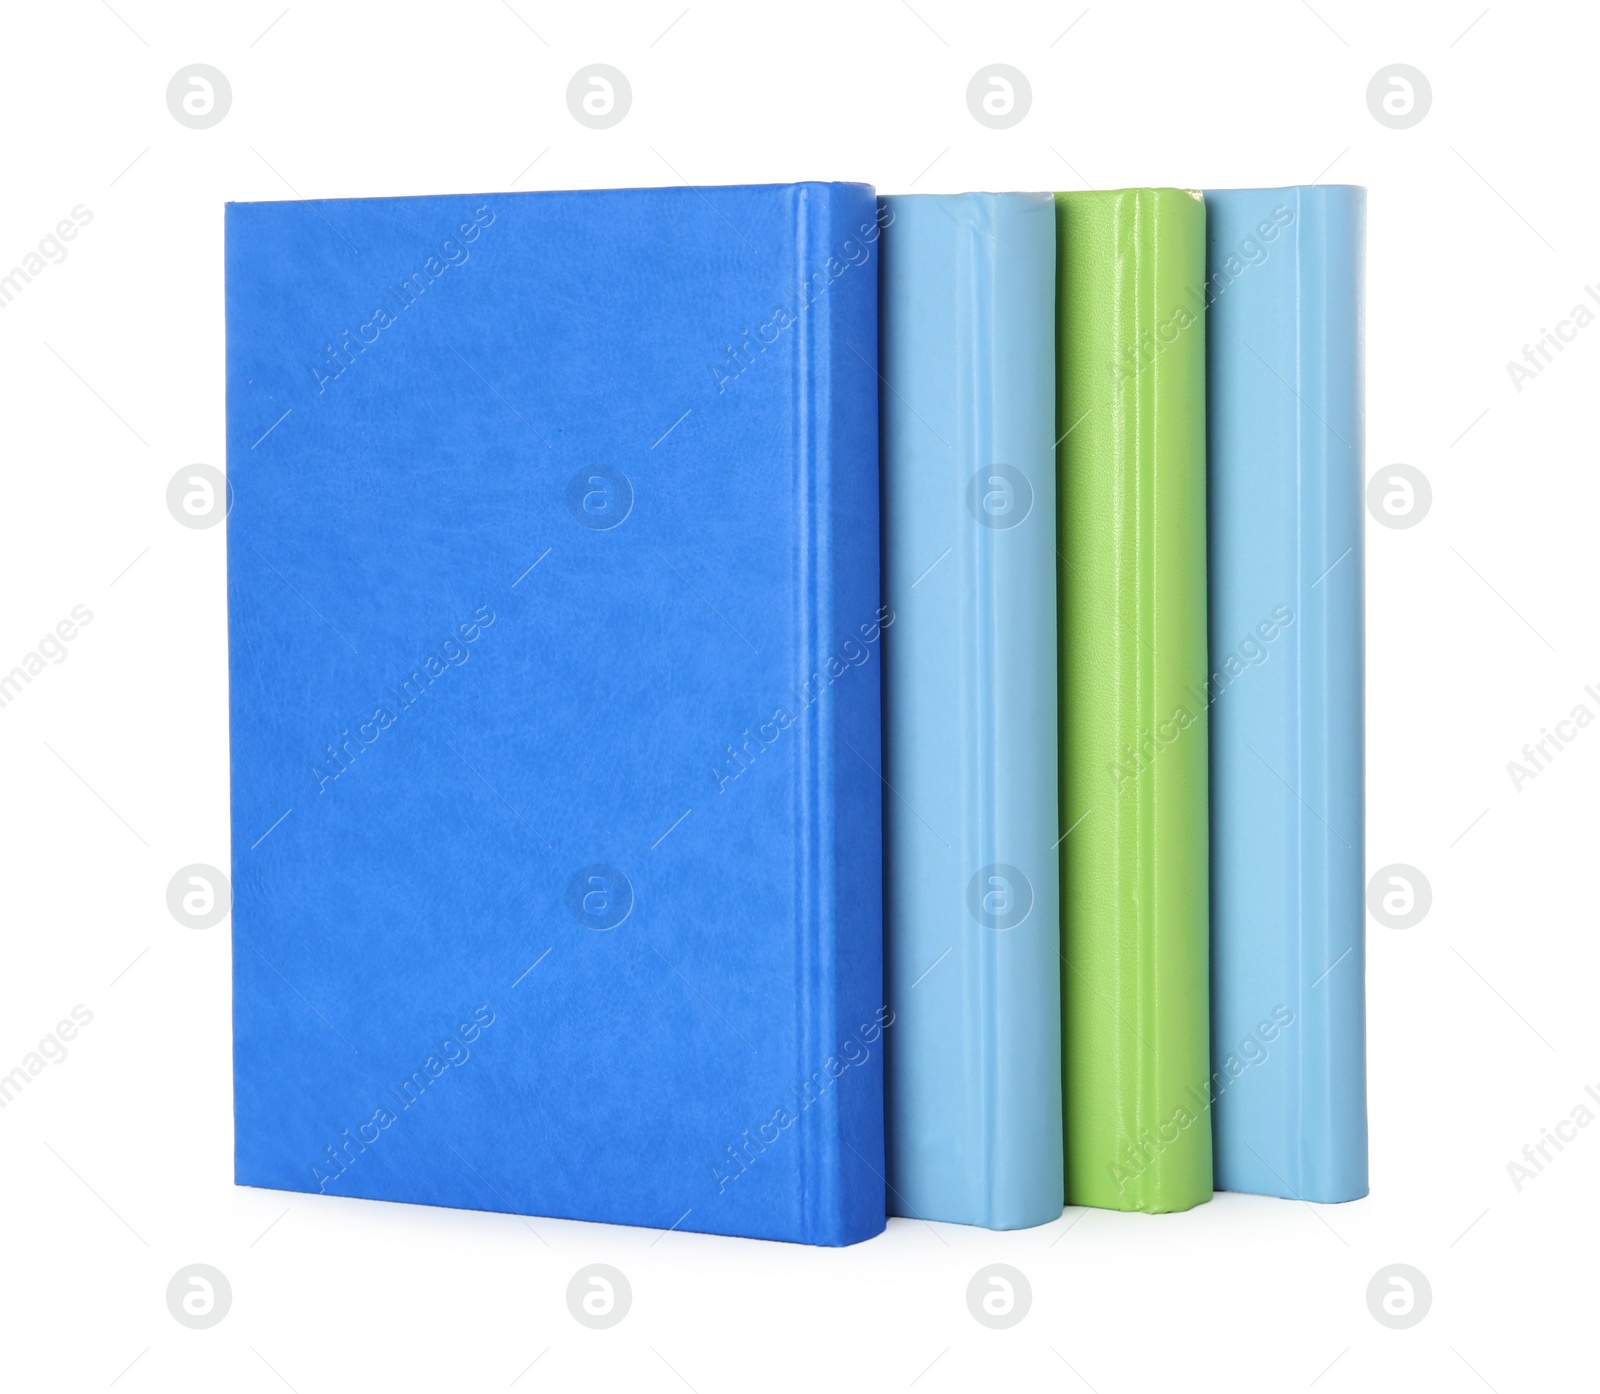 Photo of New colorful hardcover books on white background